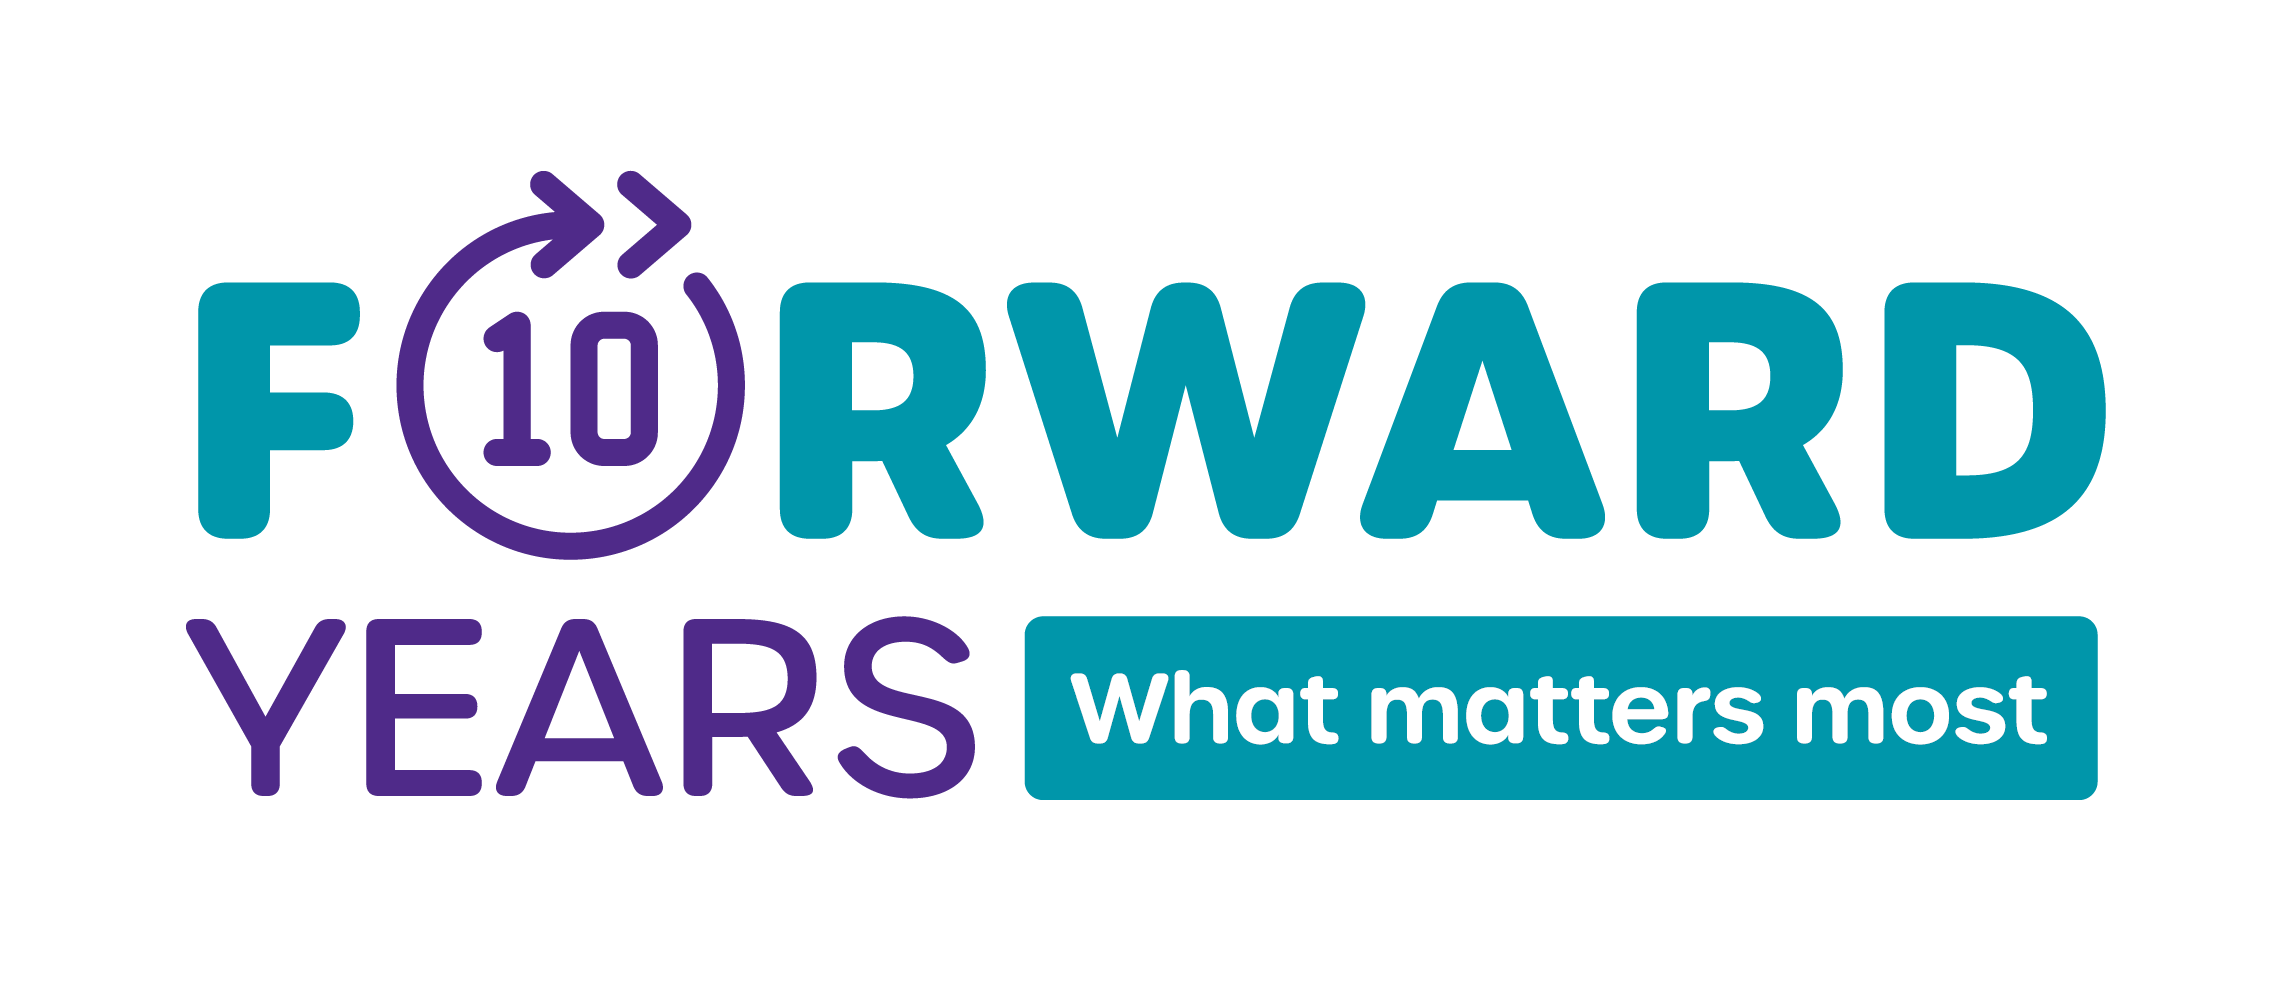 Image - Forward 10 years - what matters most